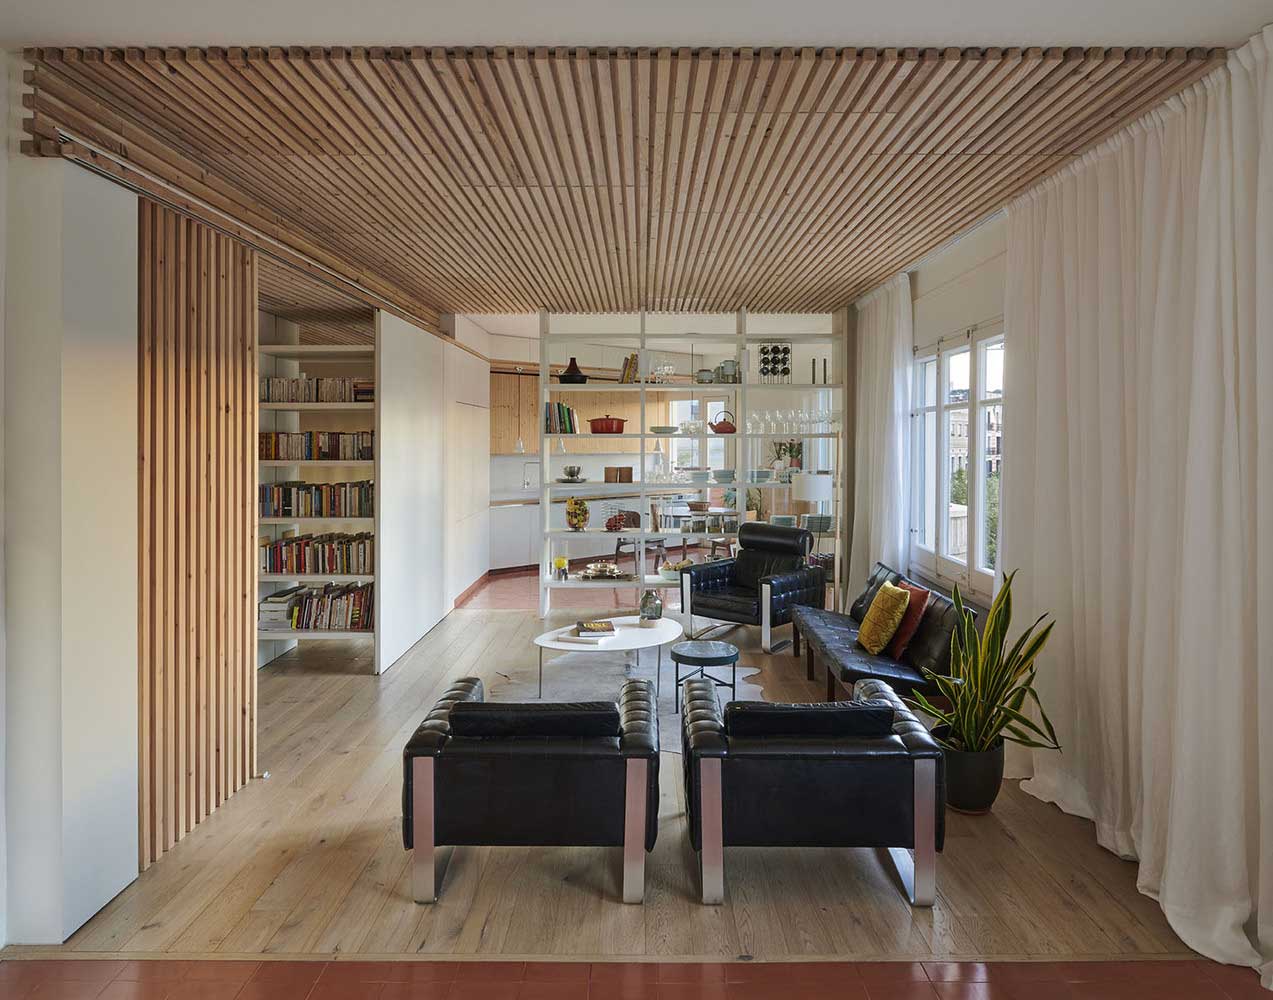 Vertical slat wall in the living room